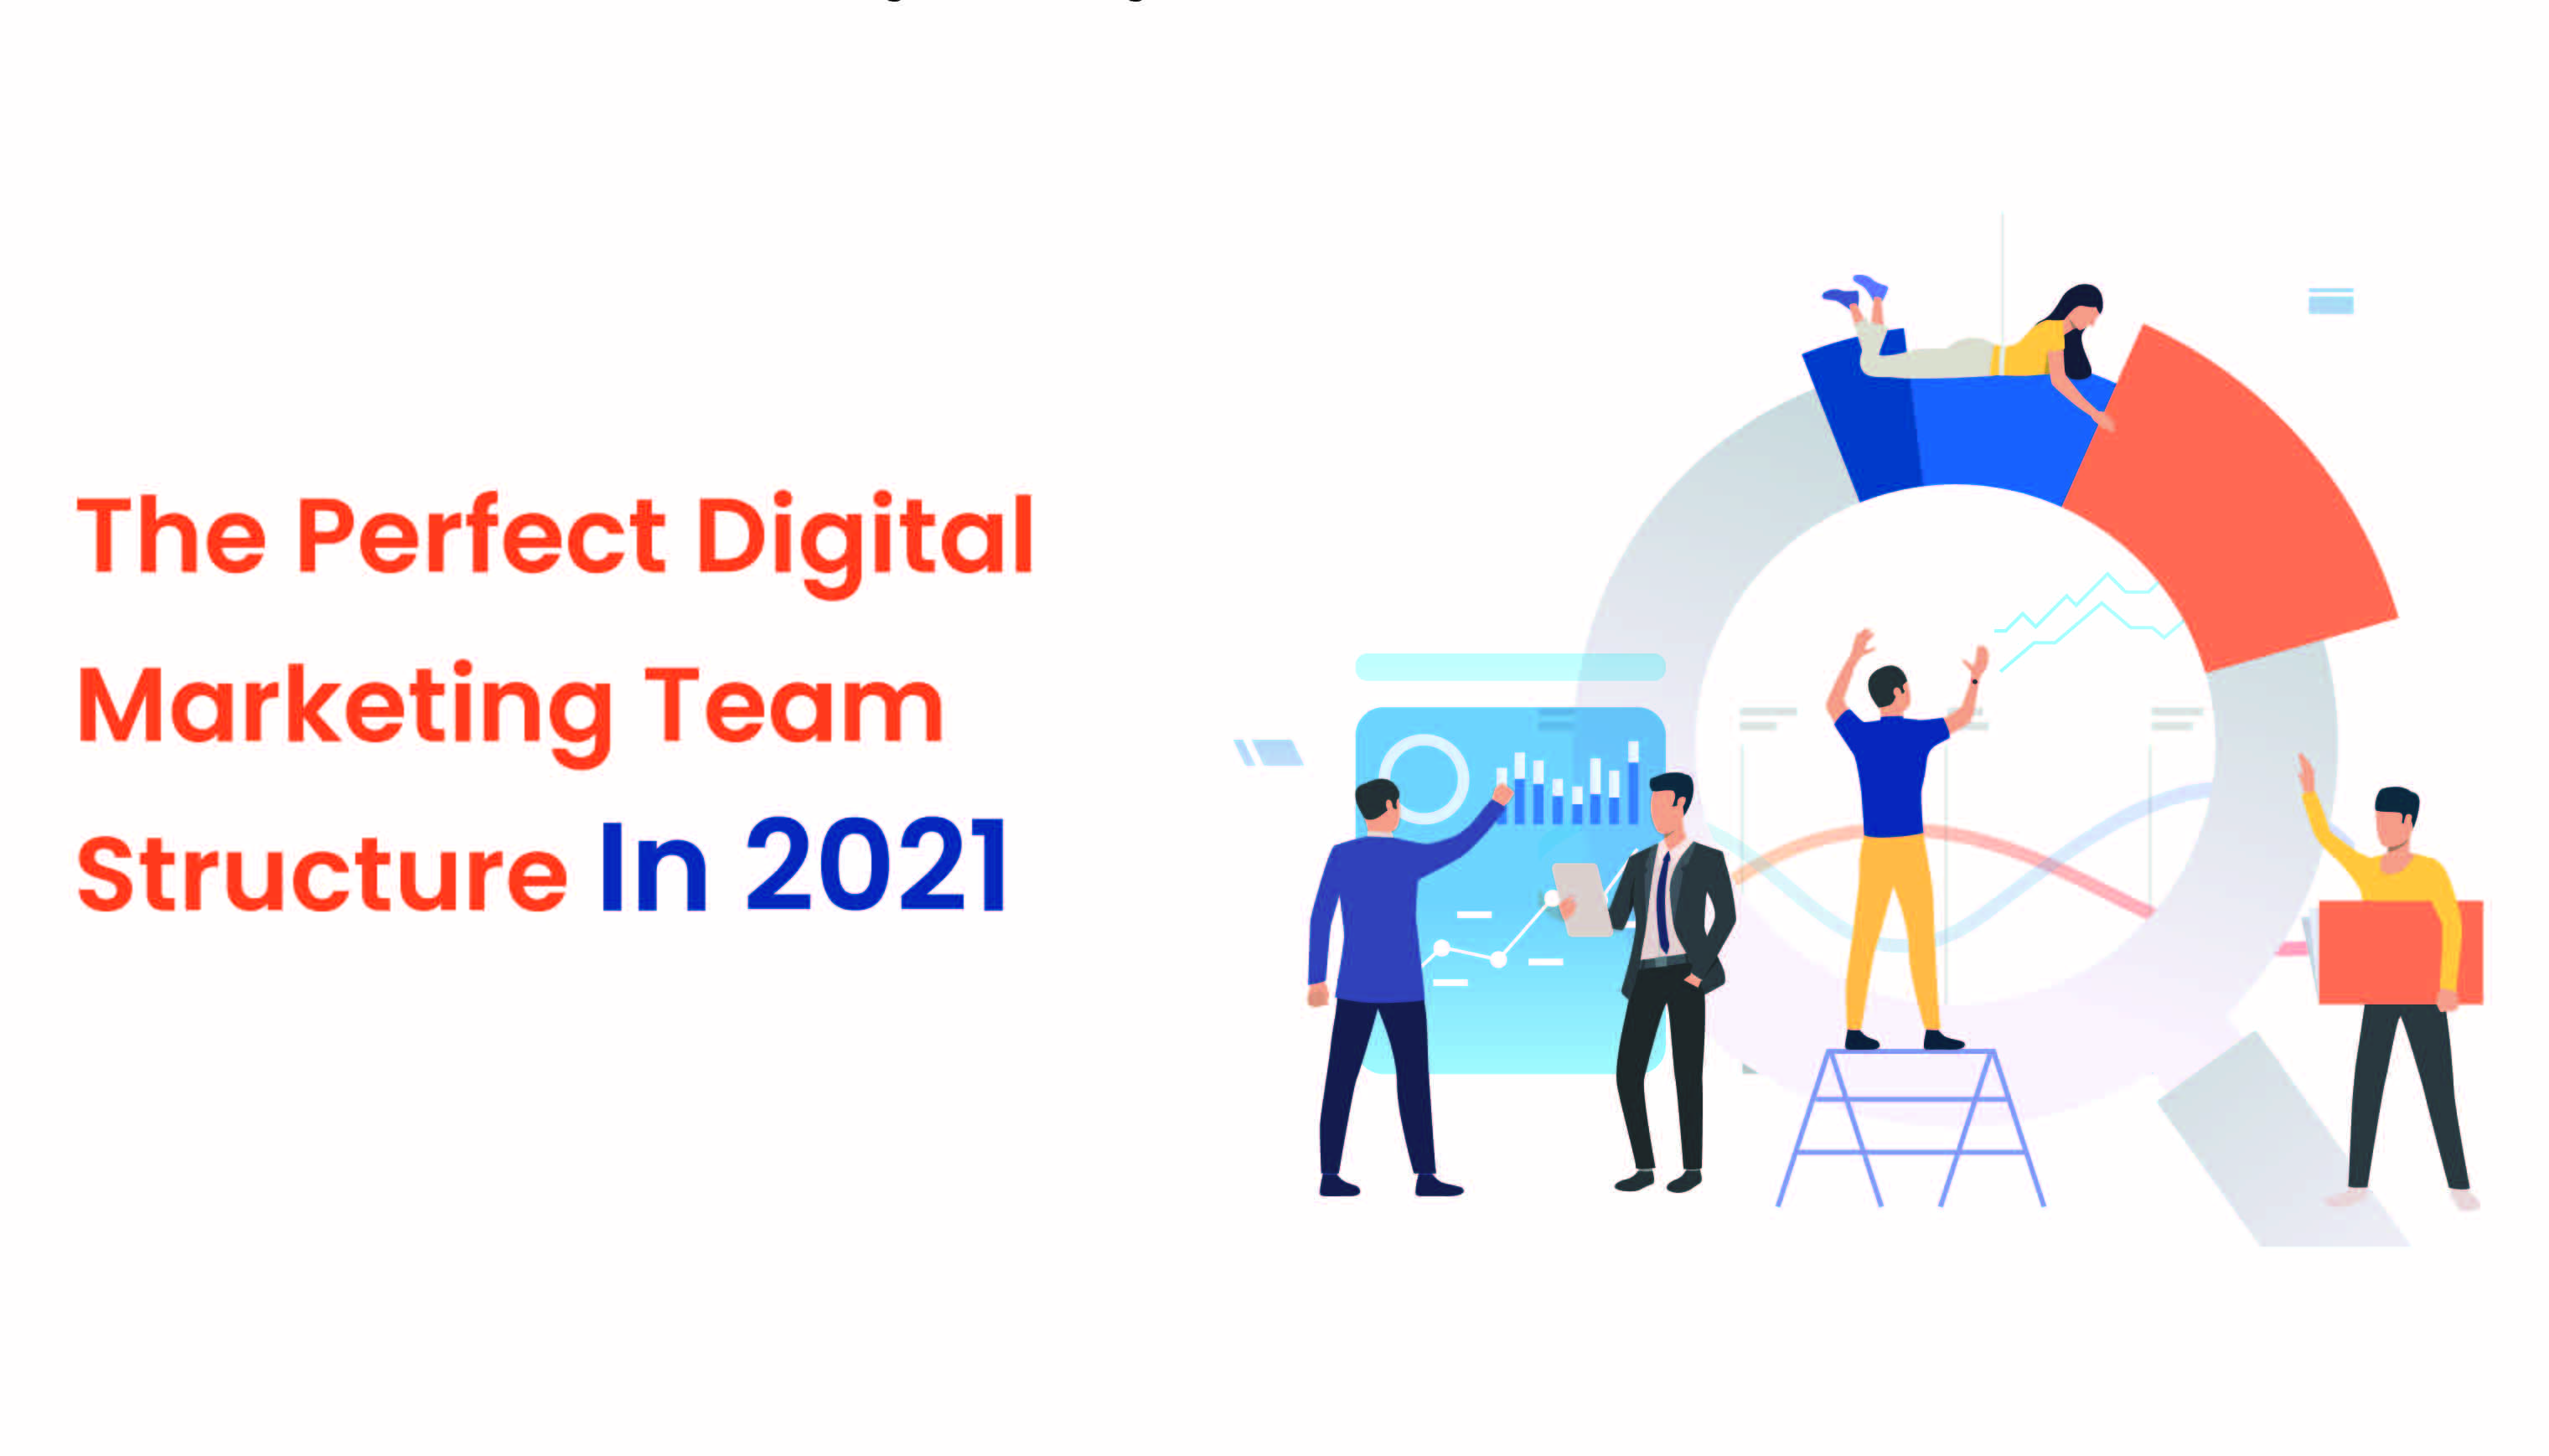 The Perfect Digital Marketing Team Structure In 2021